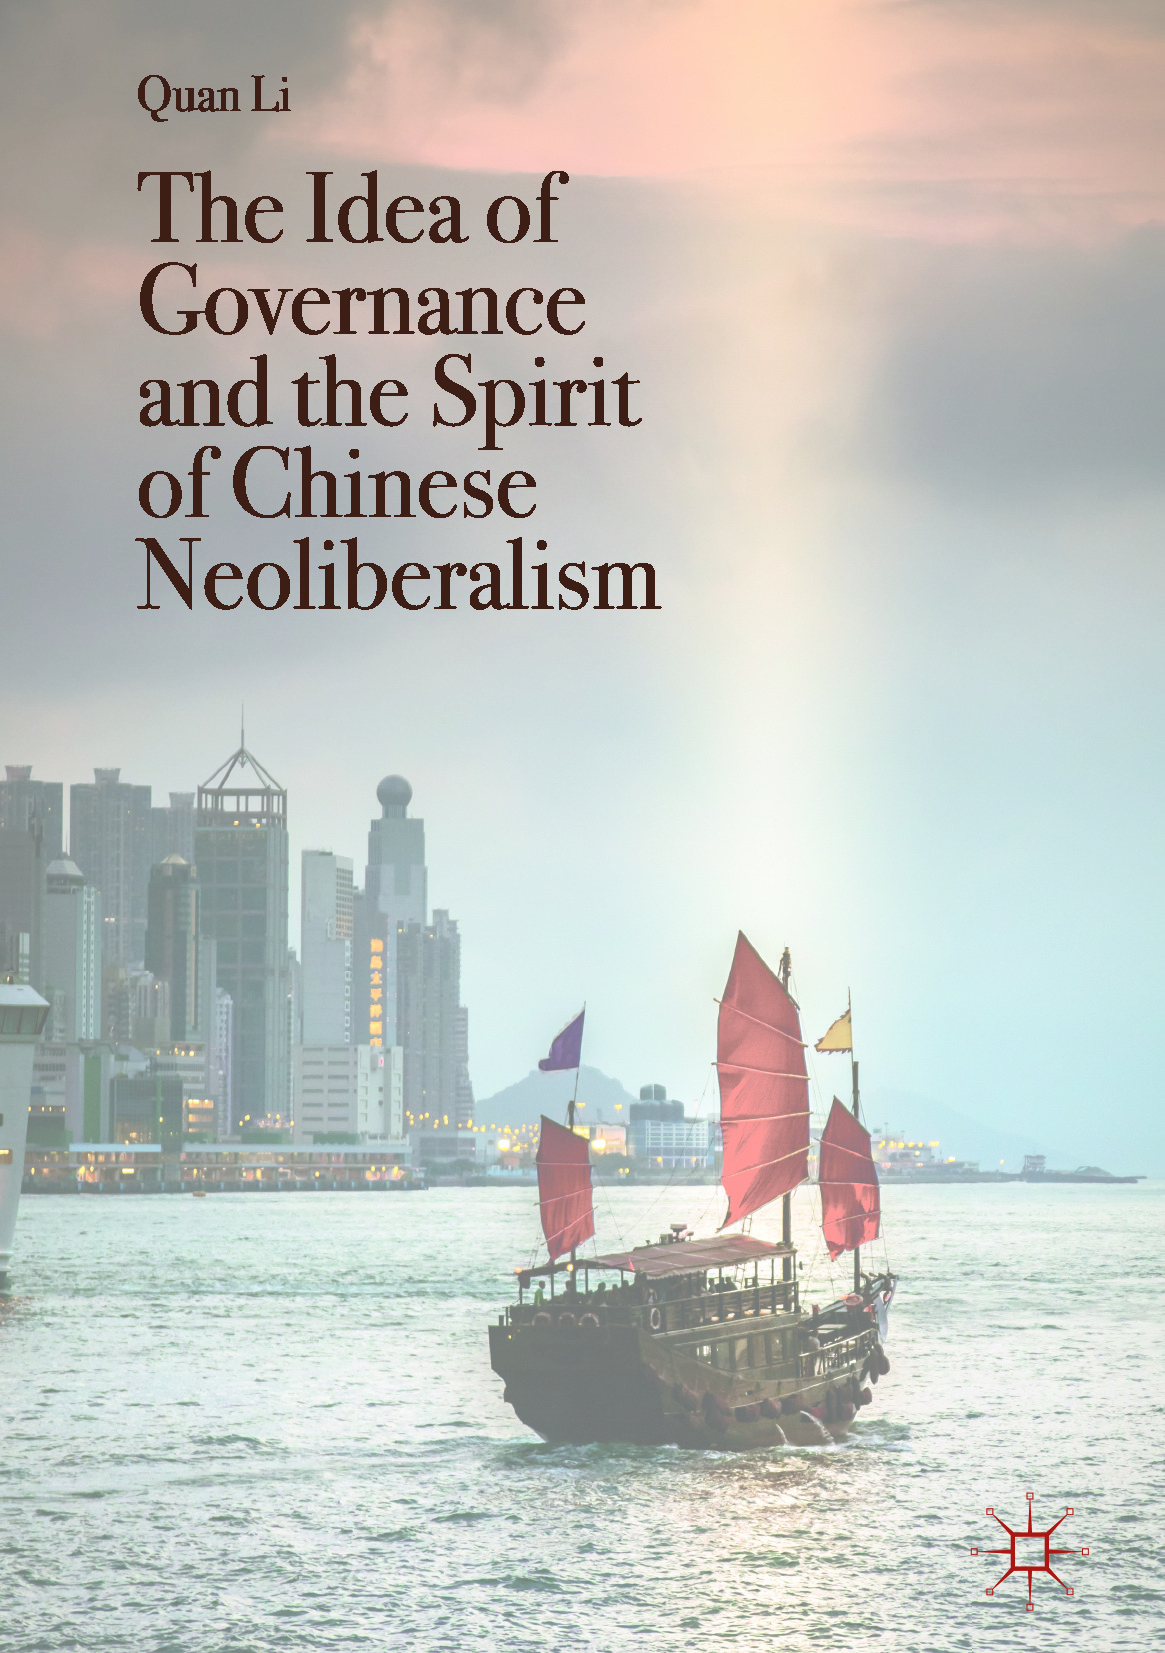 Li, Quan - The Idea of Governance and the Spirit of Chinese Neoliberalism, ebook